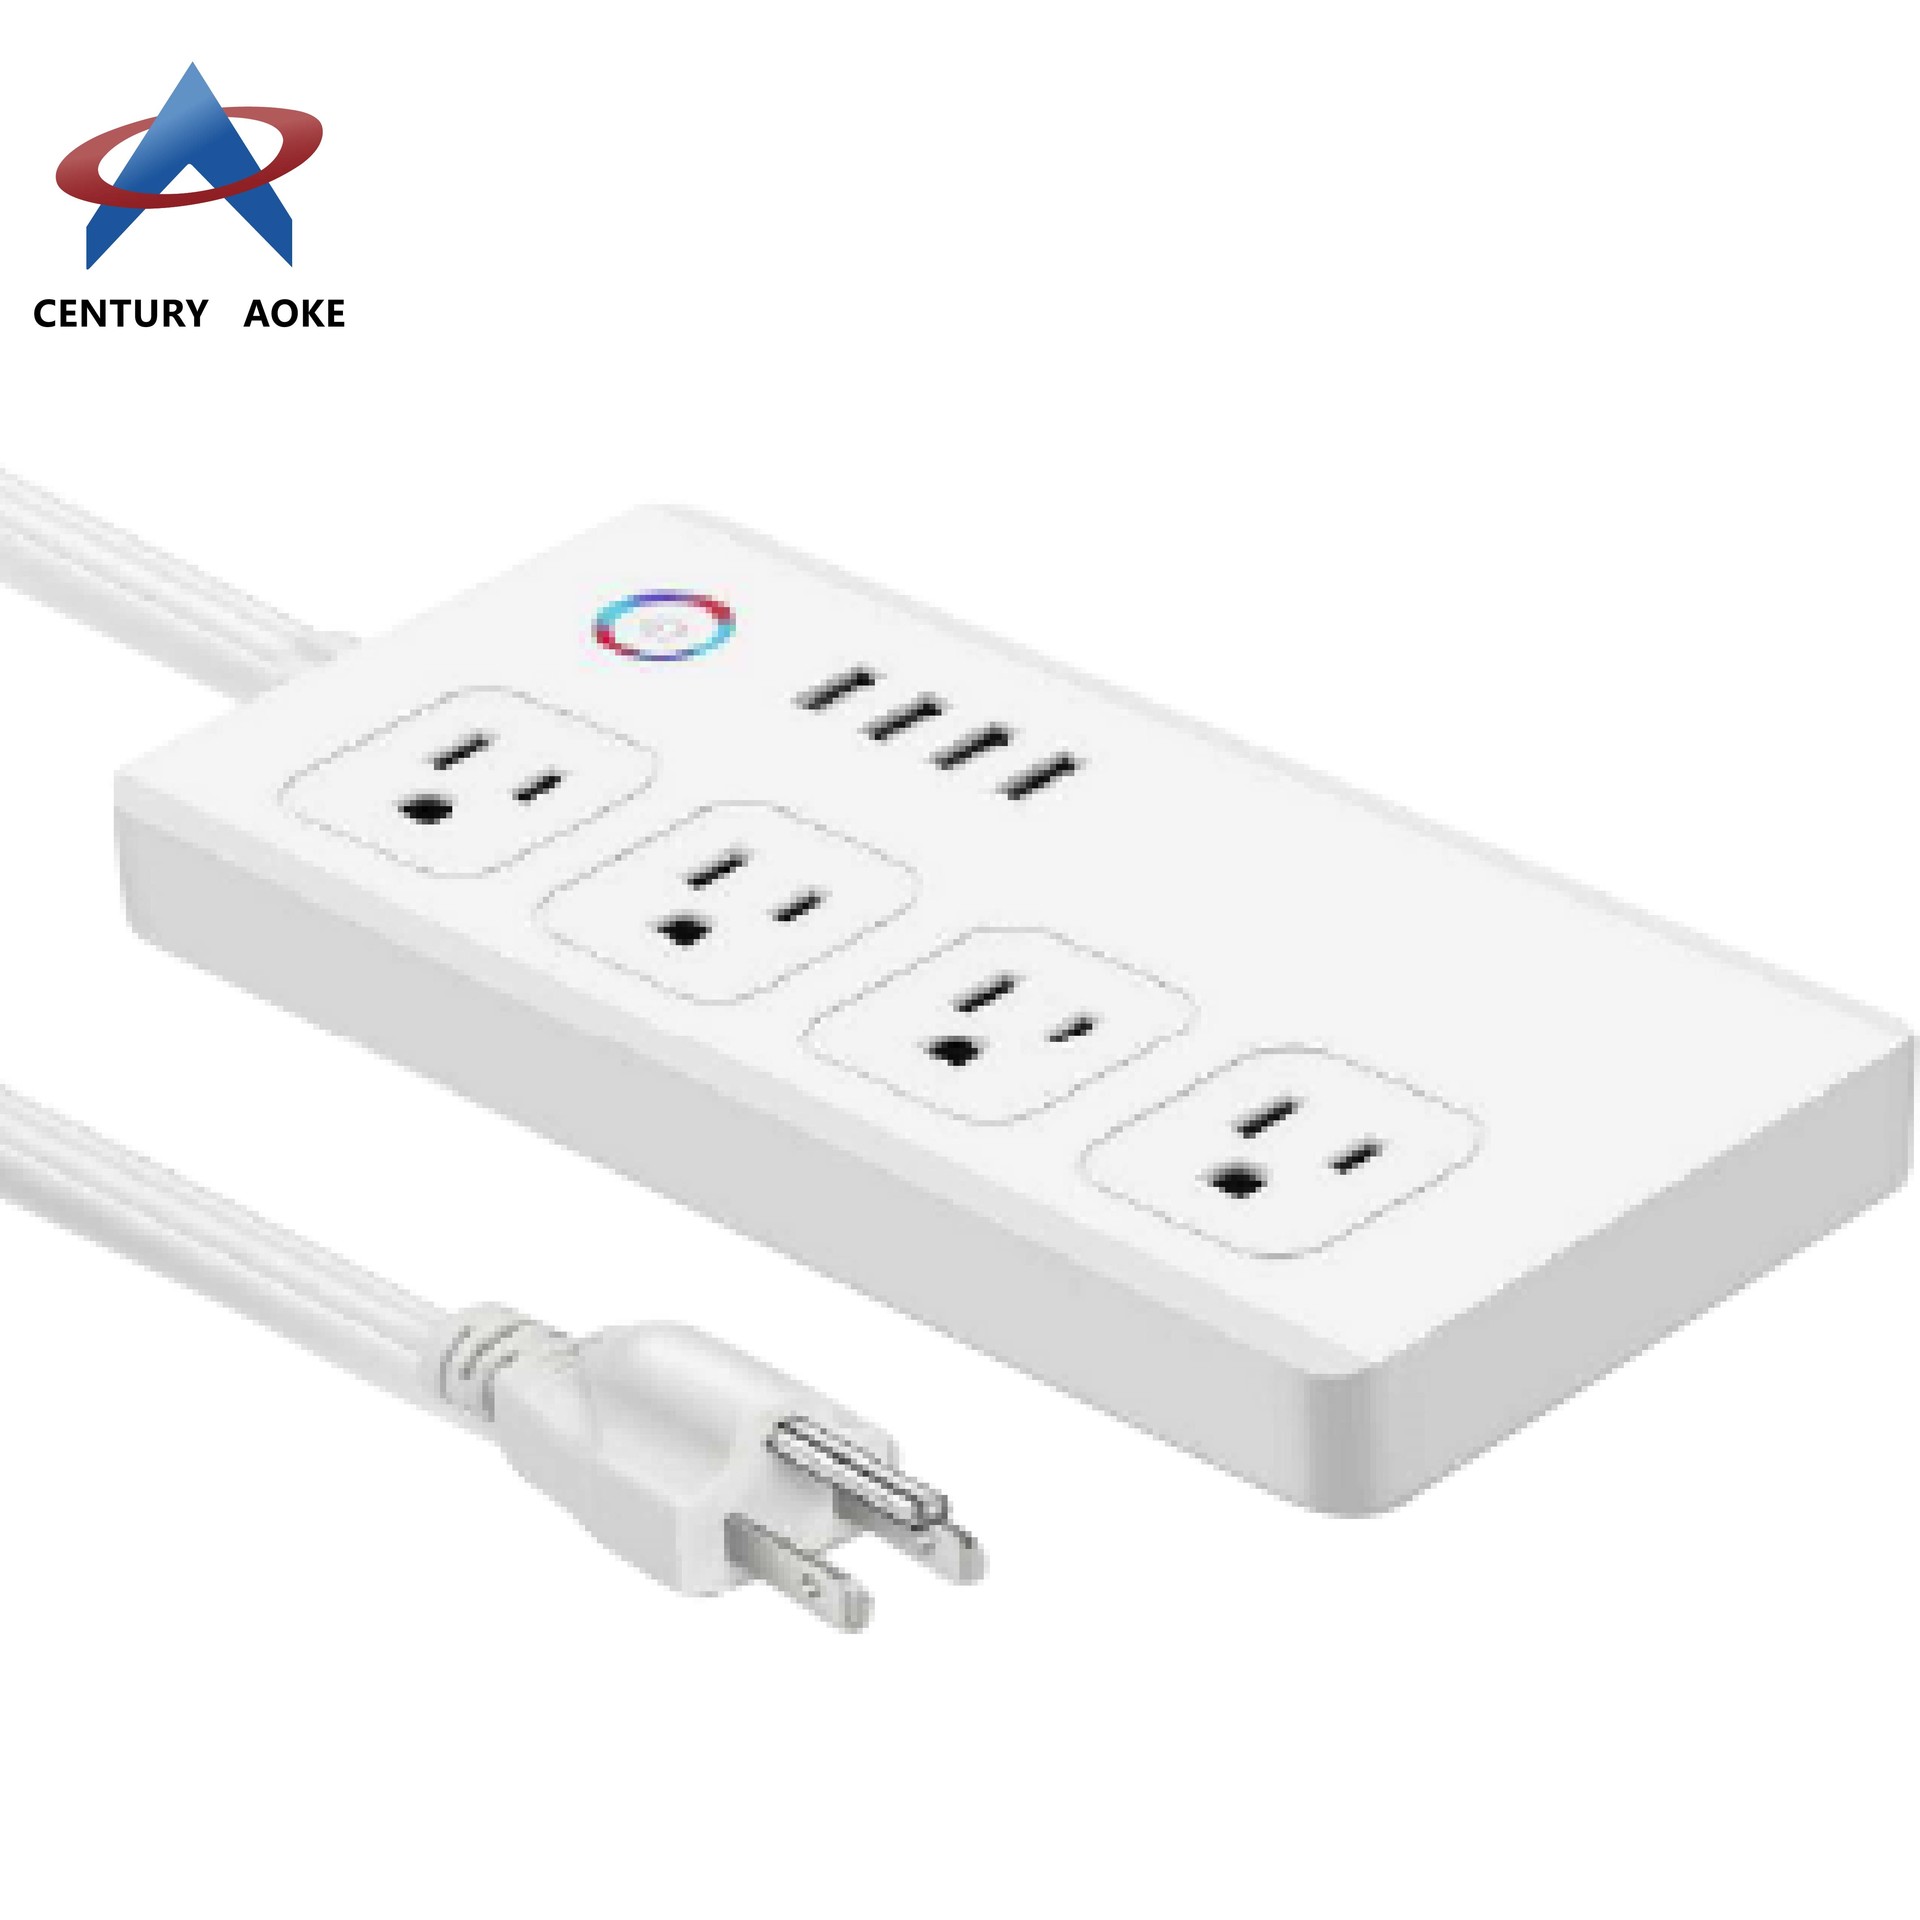 Aoke top selling wifi controlled outlet from China for home use